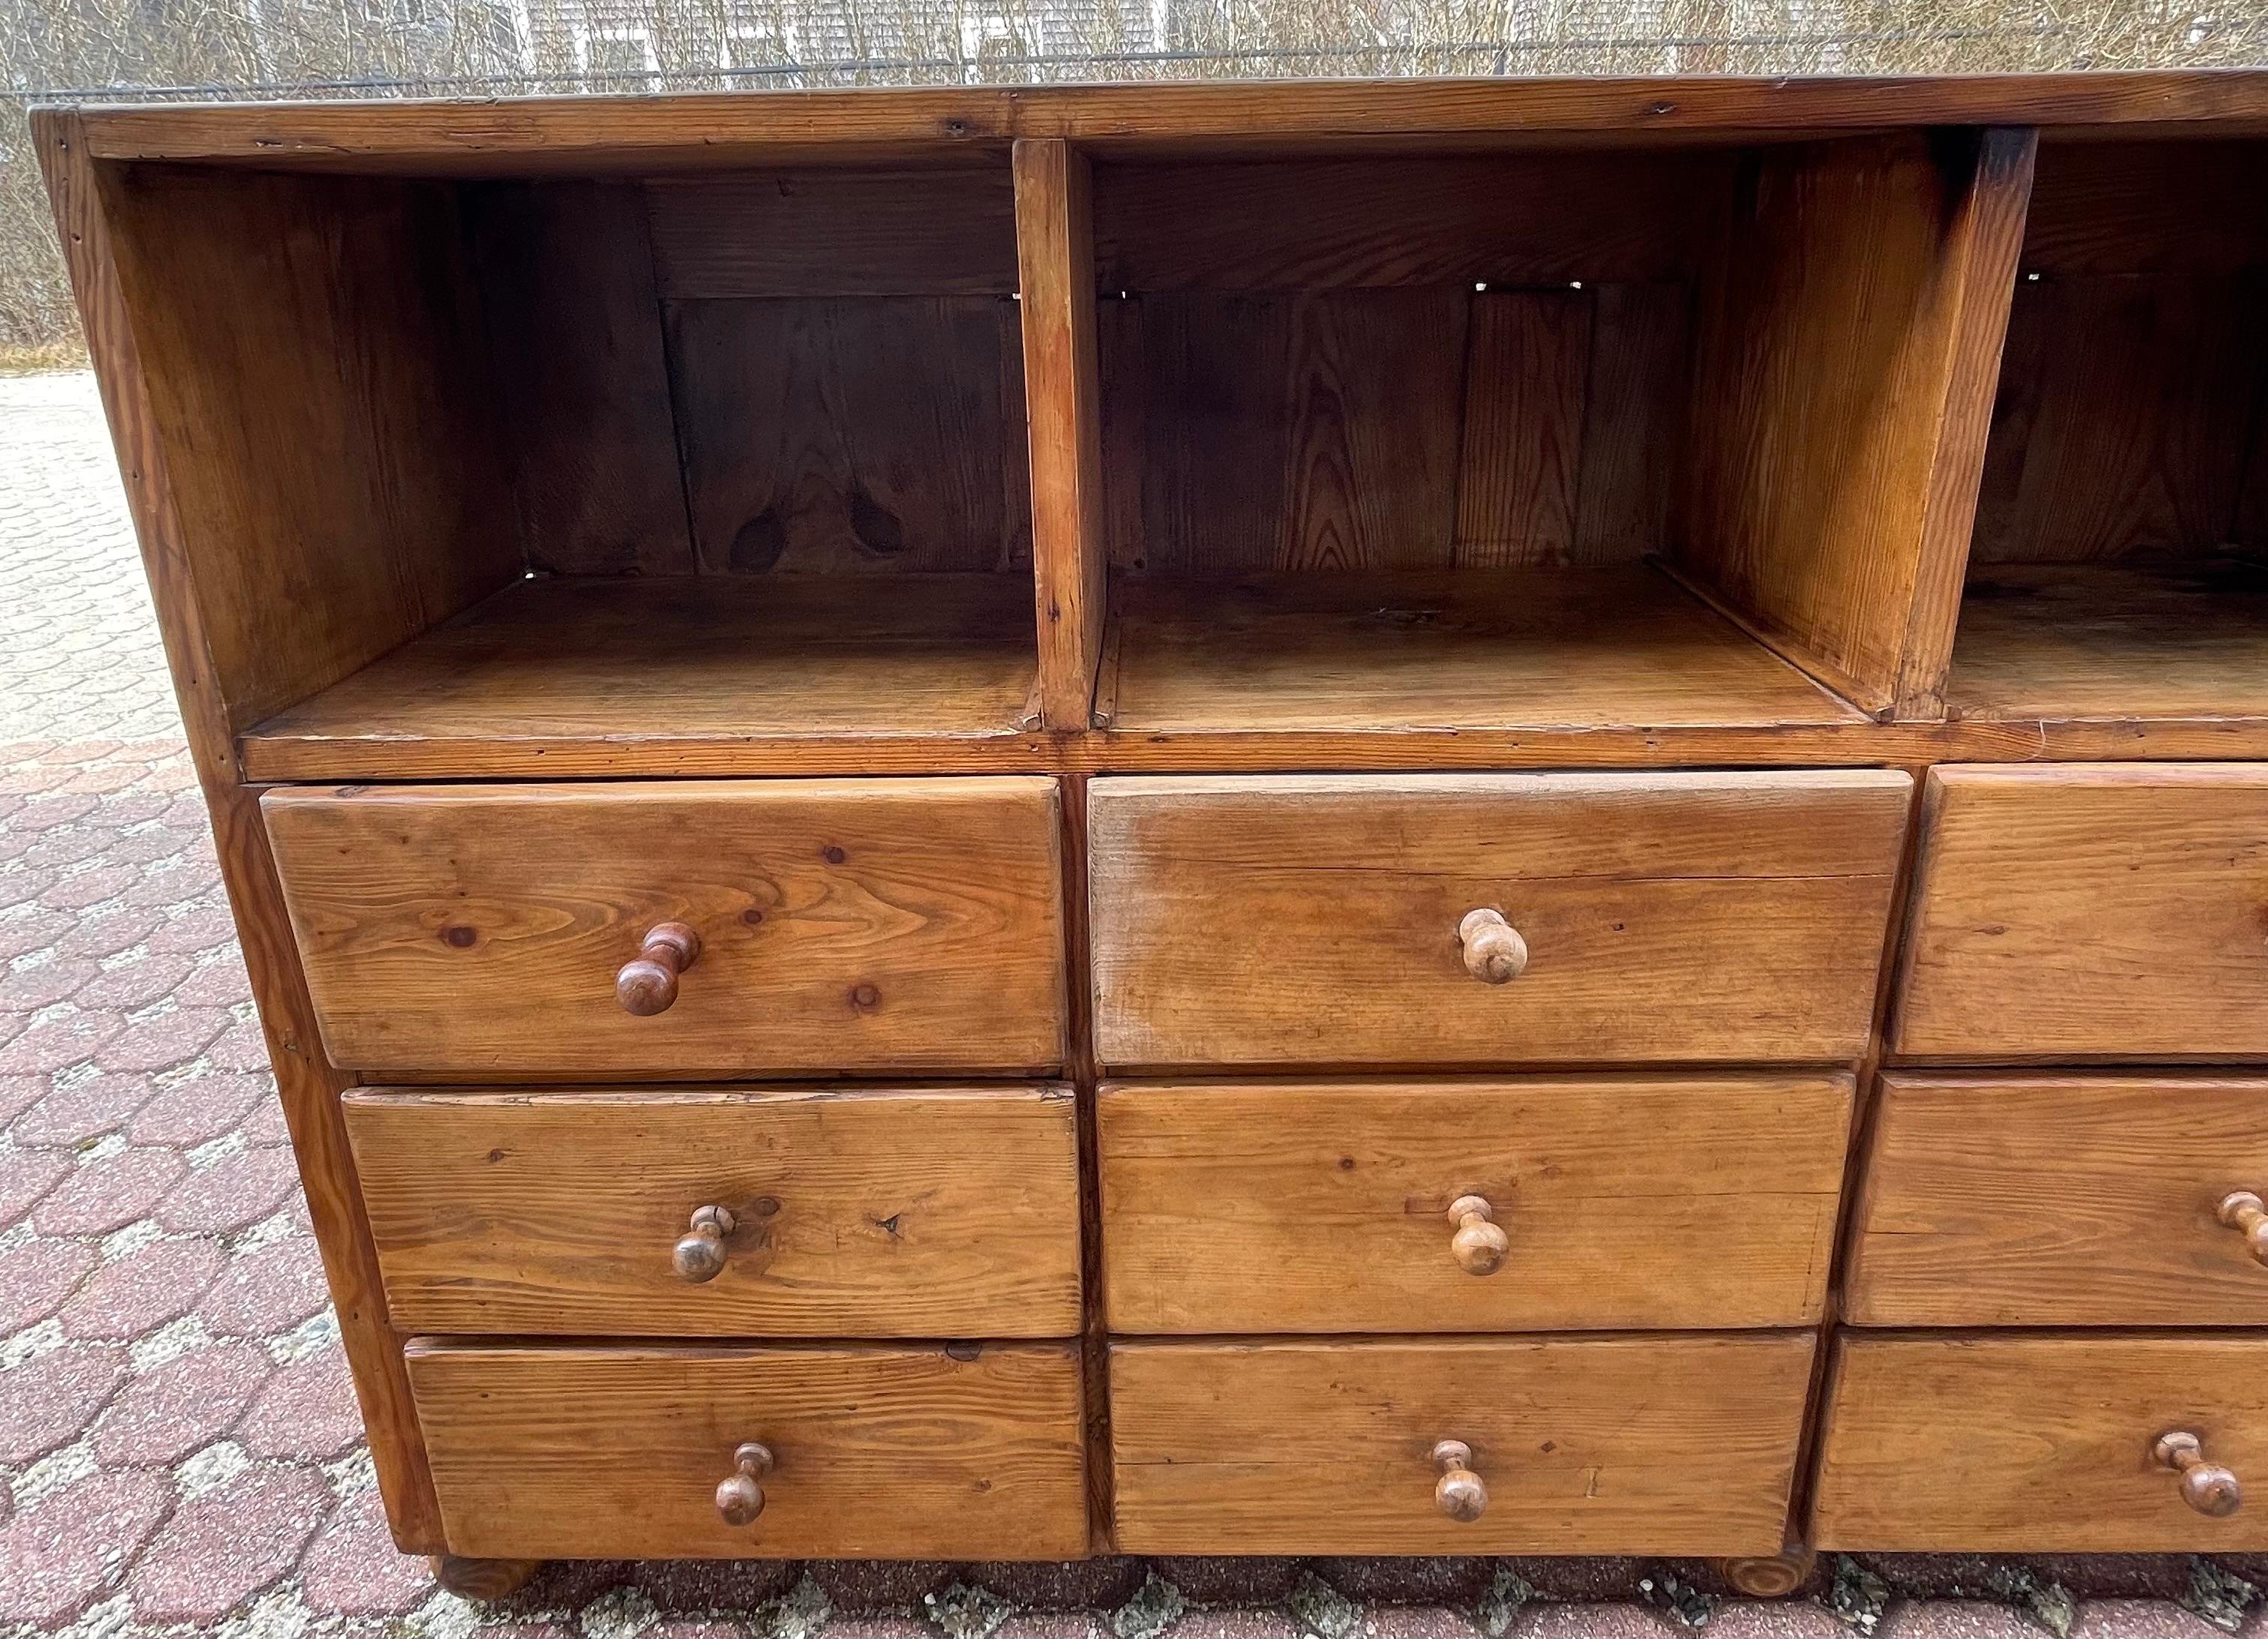 Woodwork 19th Century Pine Server with Cupboard Openings and Apothecary-type Drawers